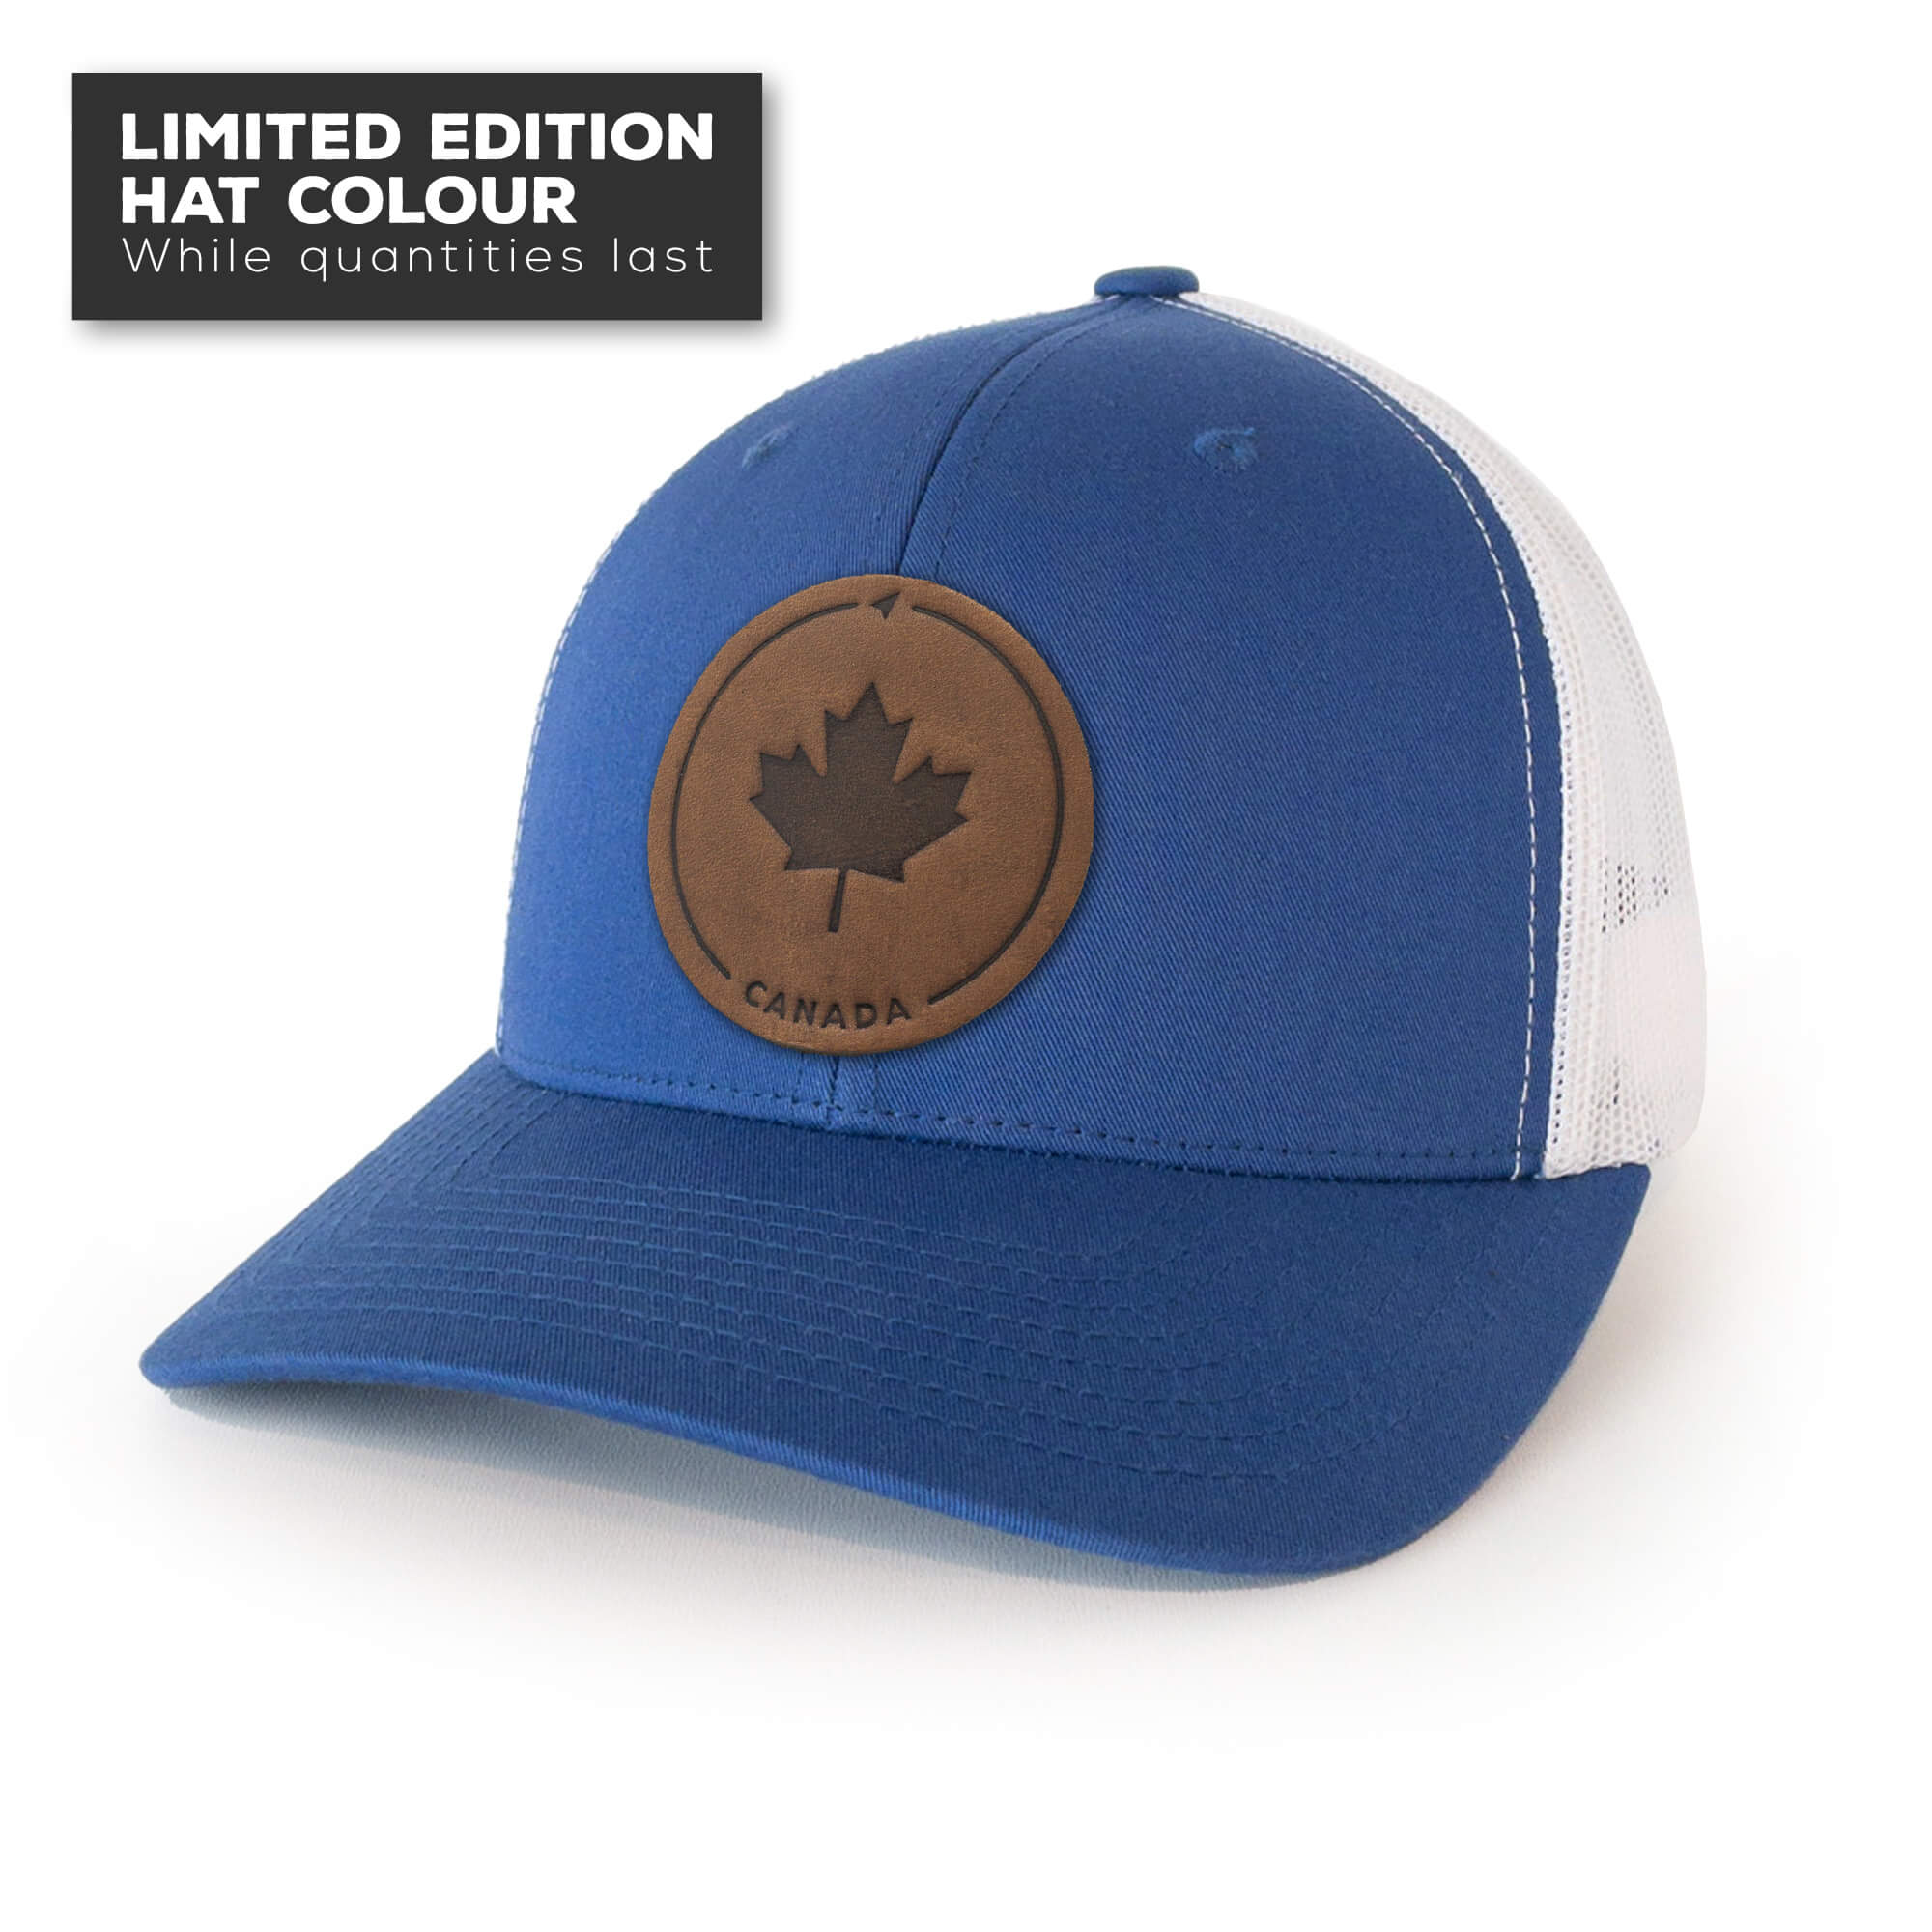 Royal Blue trucker hat with full-grain leather patch of Maple Leaf